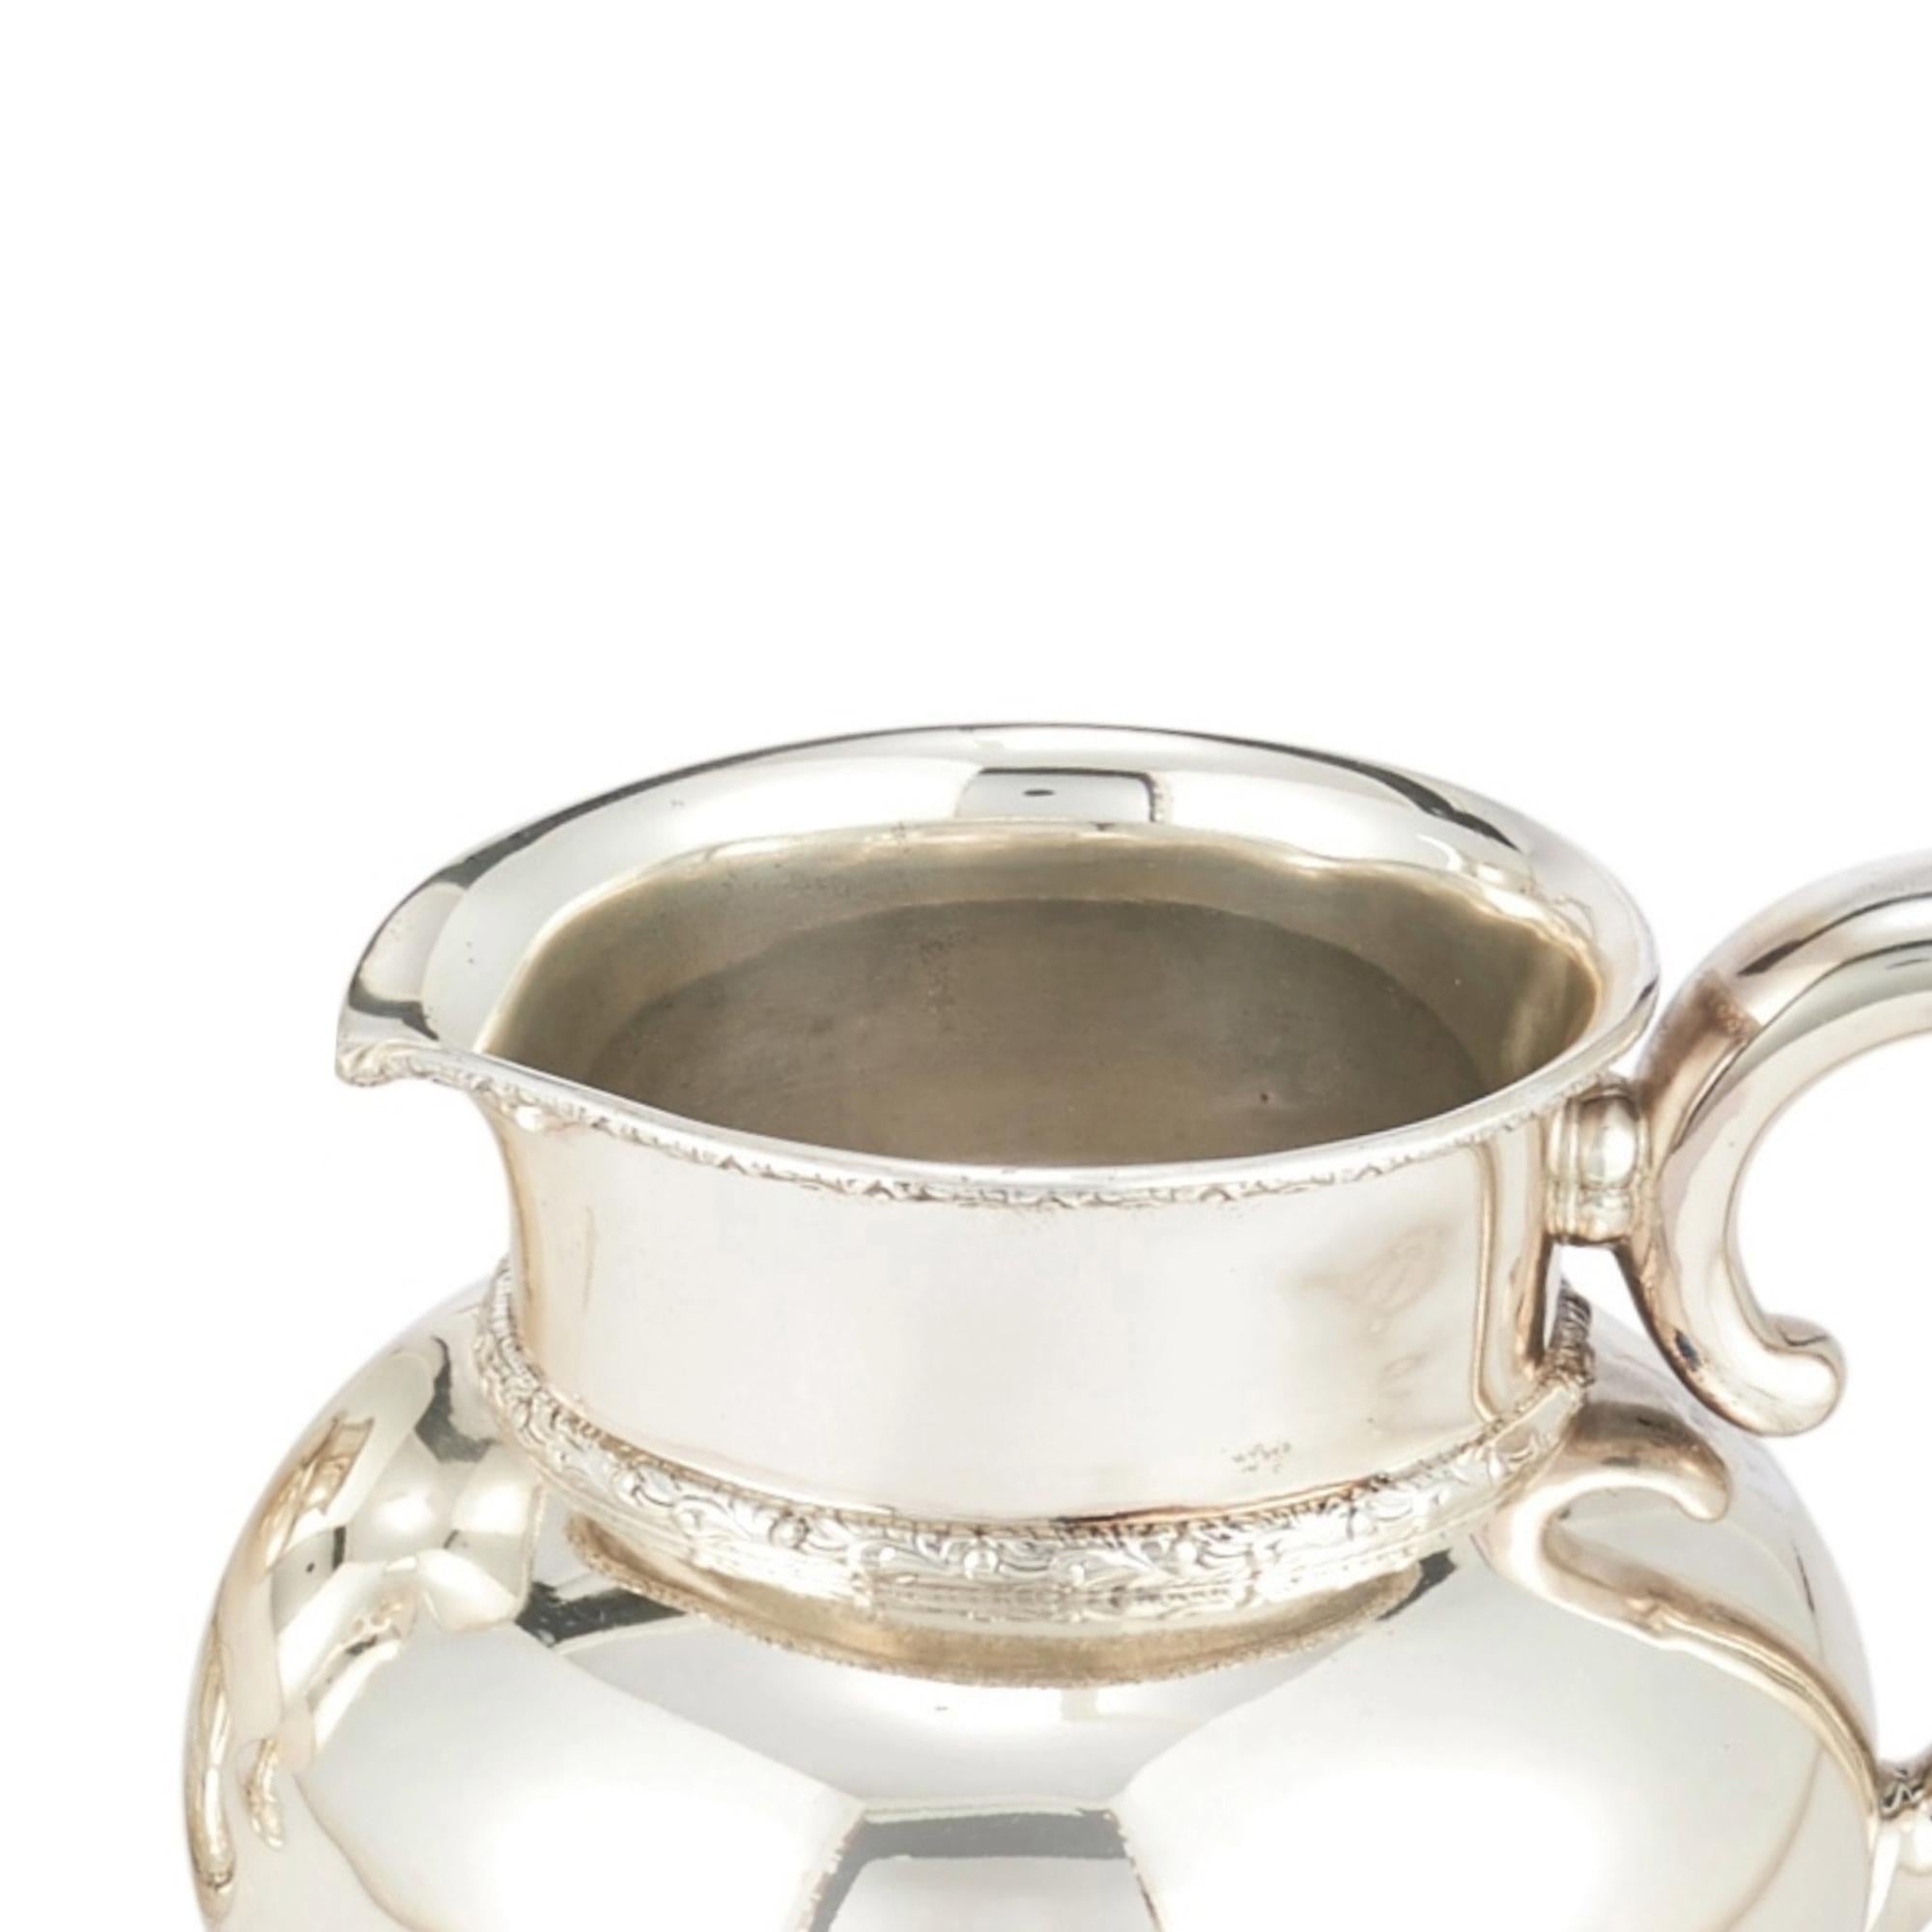 Early 20th Century Sterling Silver Tableware Serveware Pitcher For Sale 1